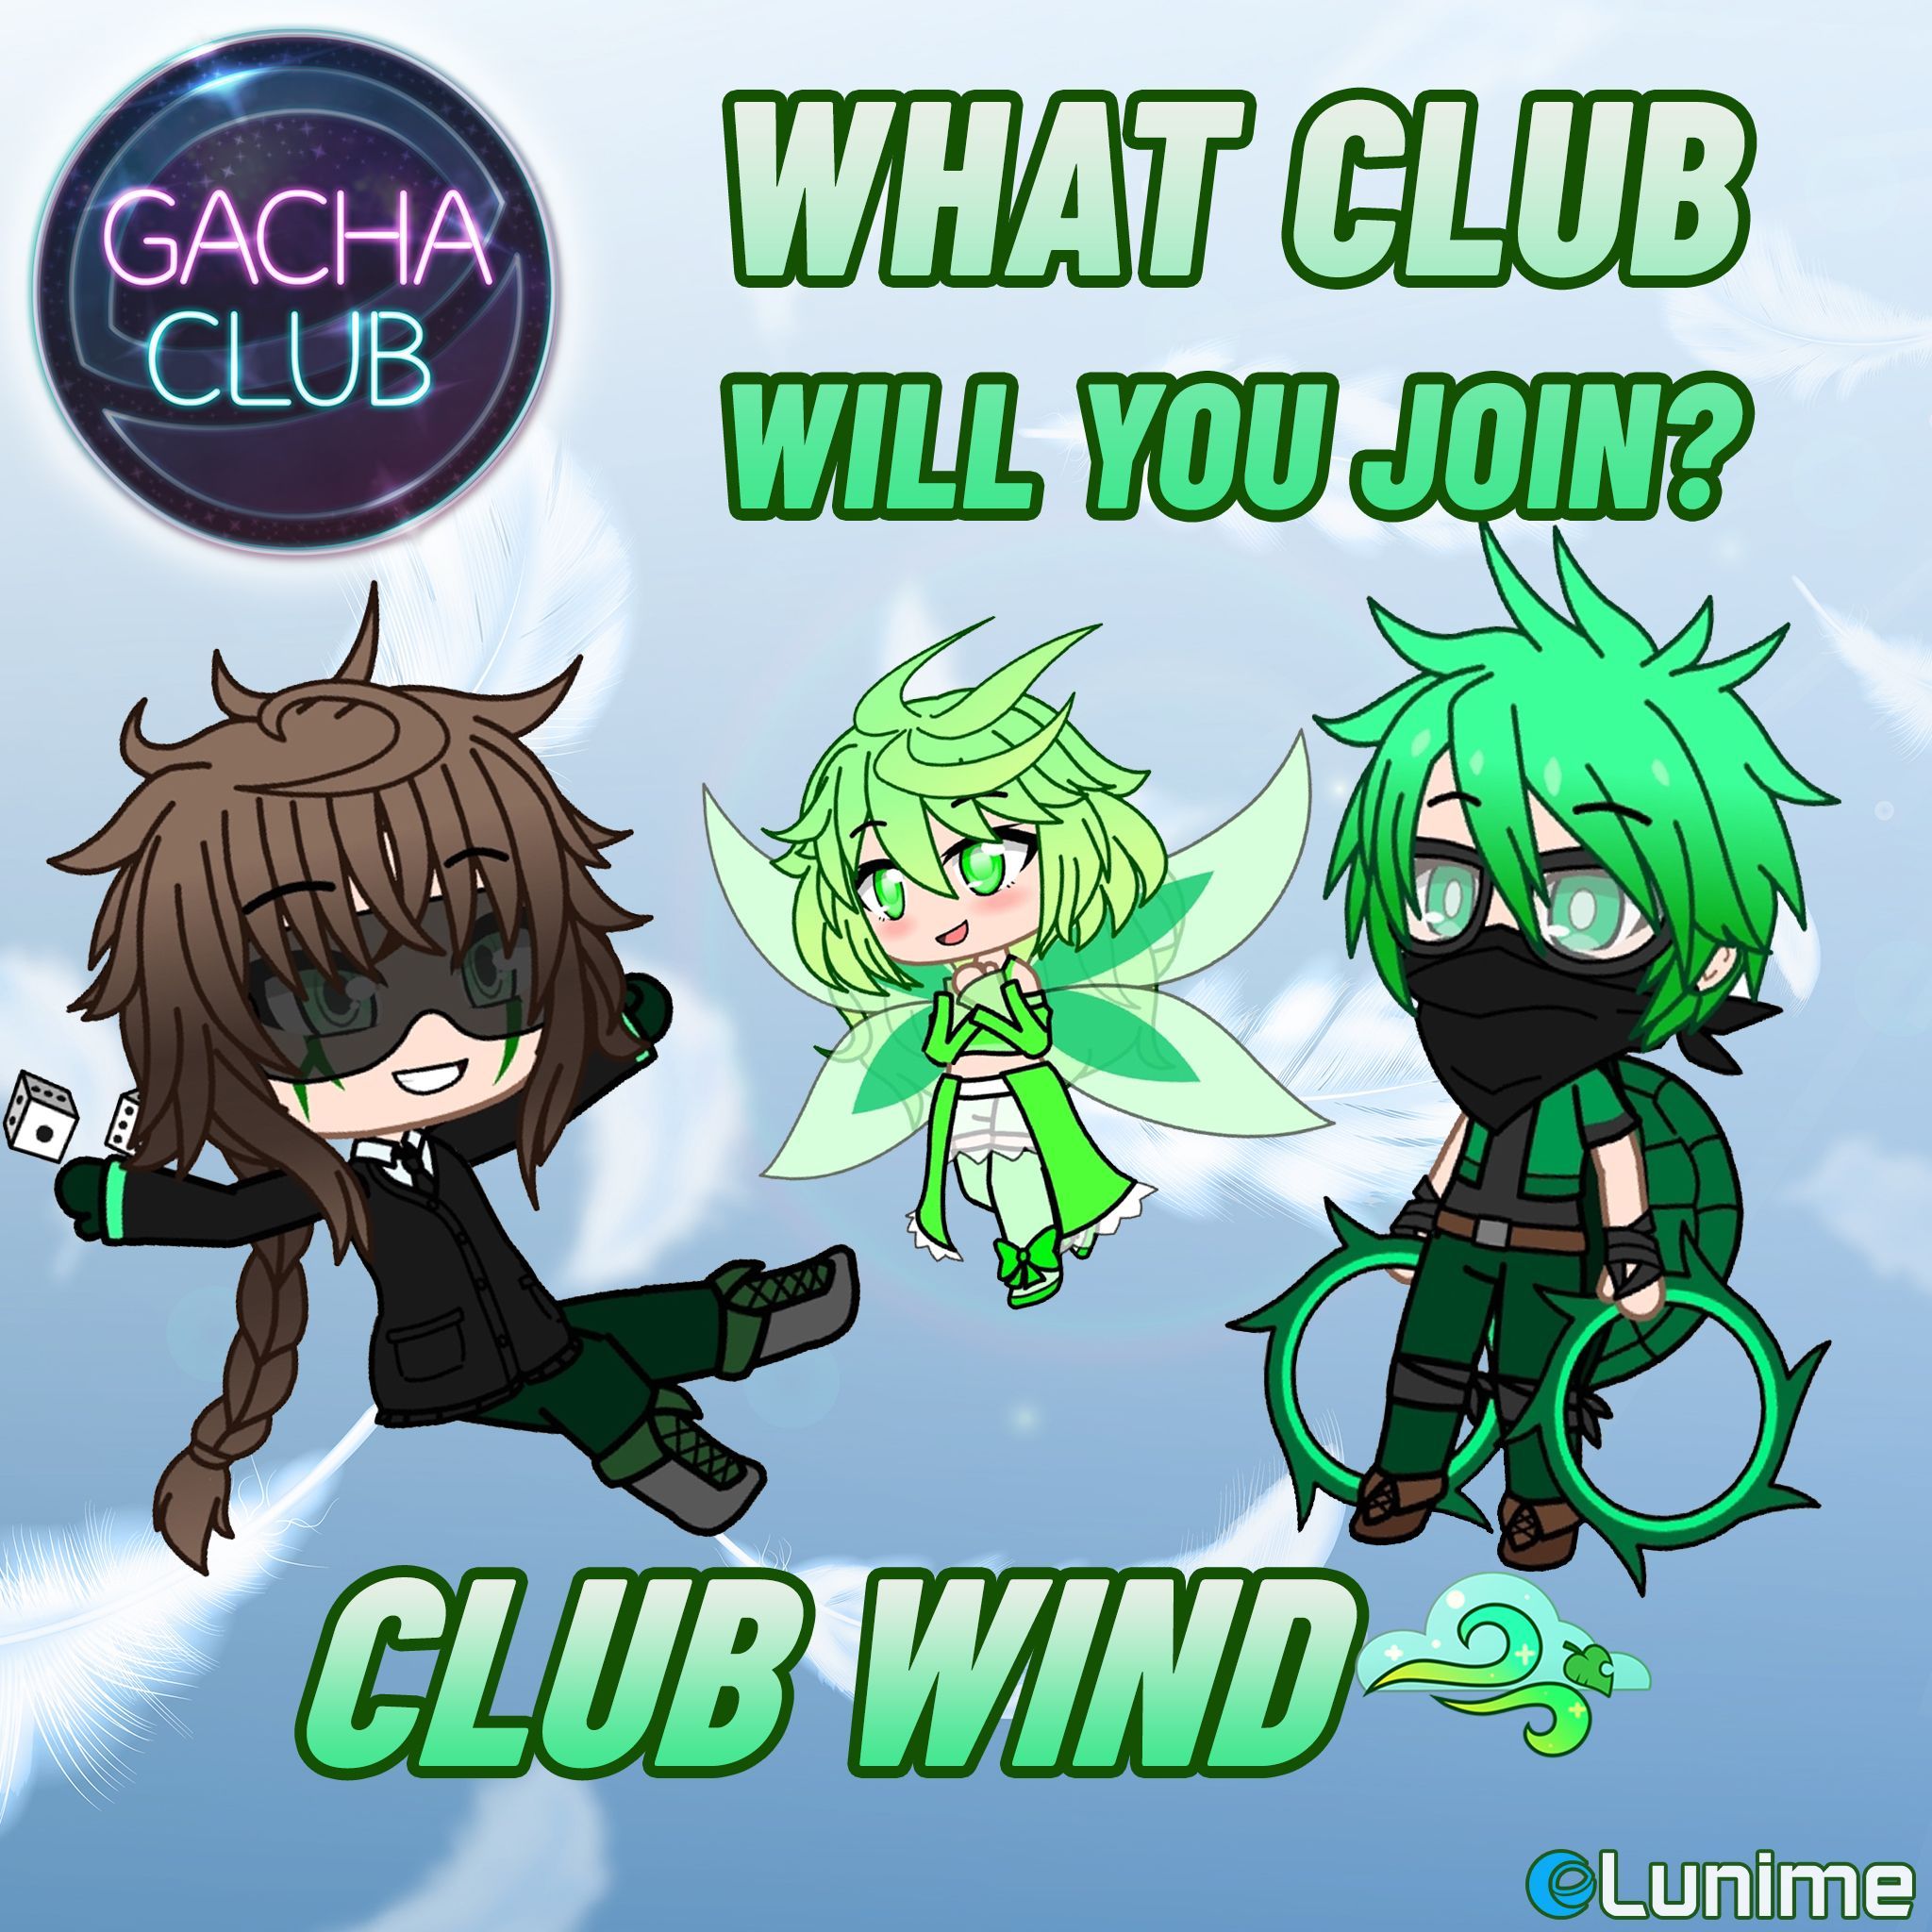 Lunime on X: Gacha Club is coming! Do you want to get your ideas